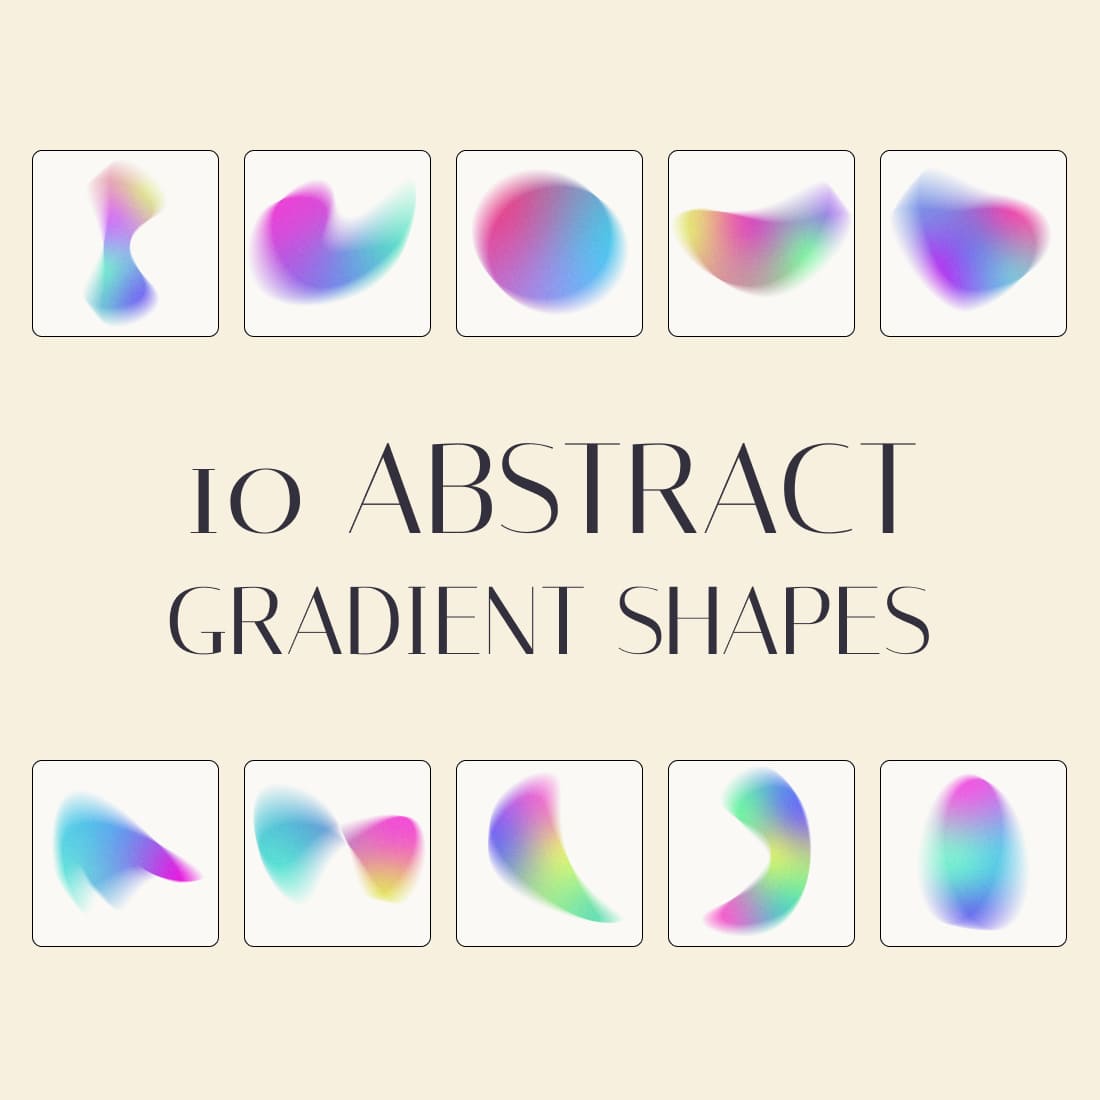 Gradient Abstract Shapes Vector Design cover image.